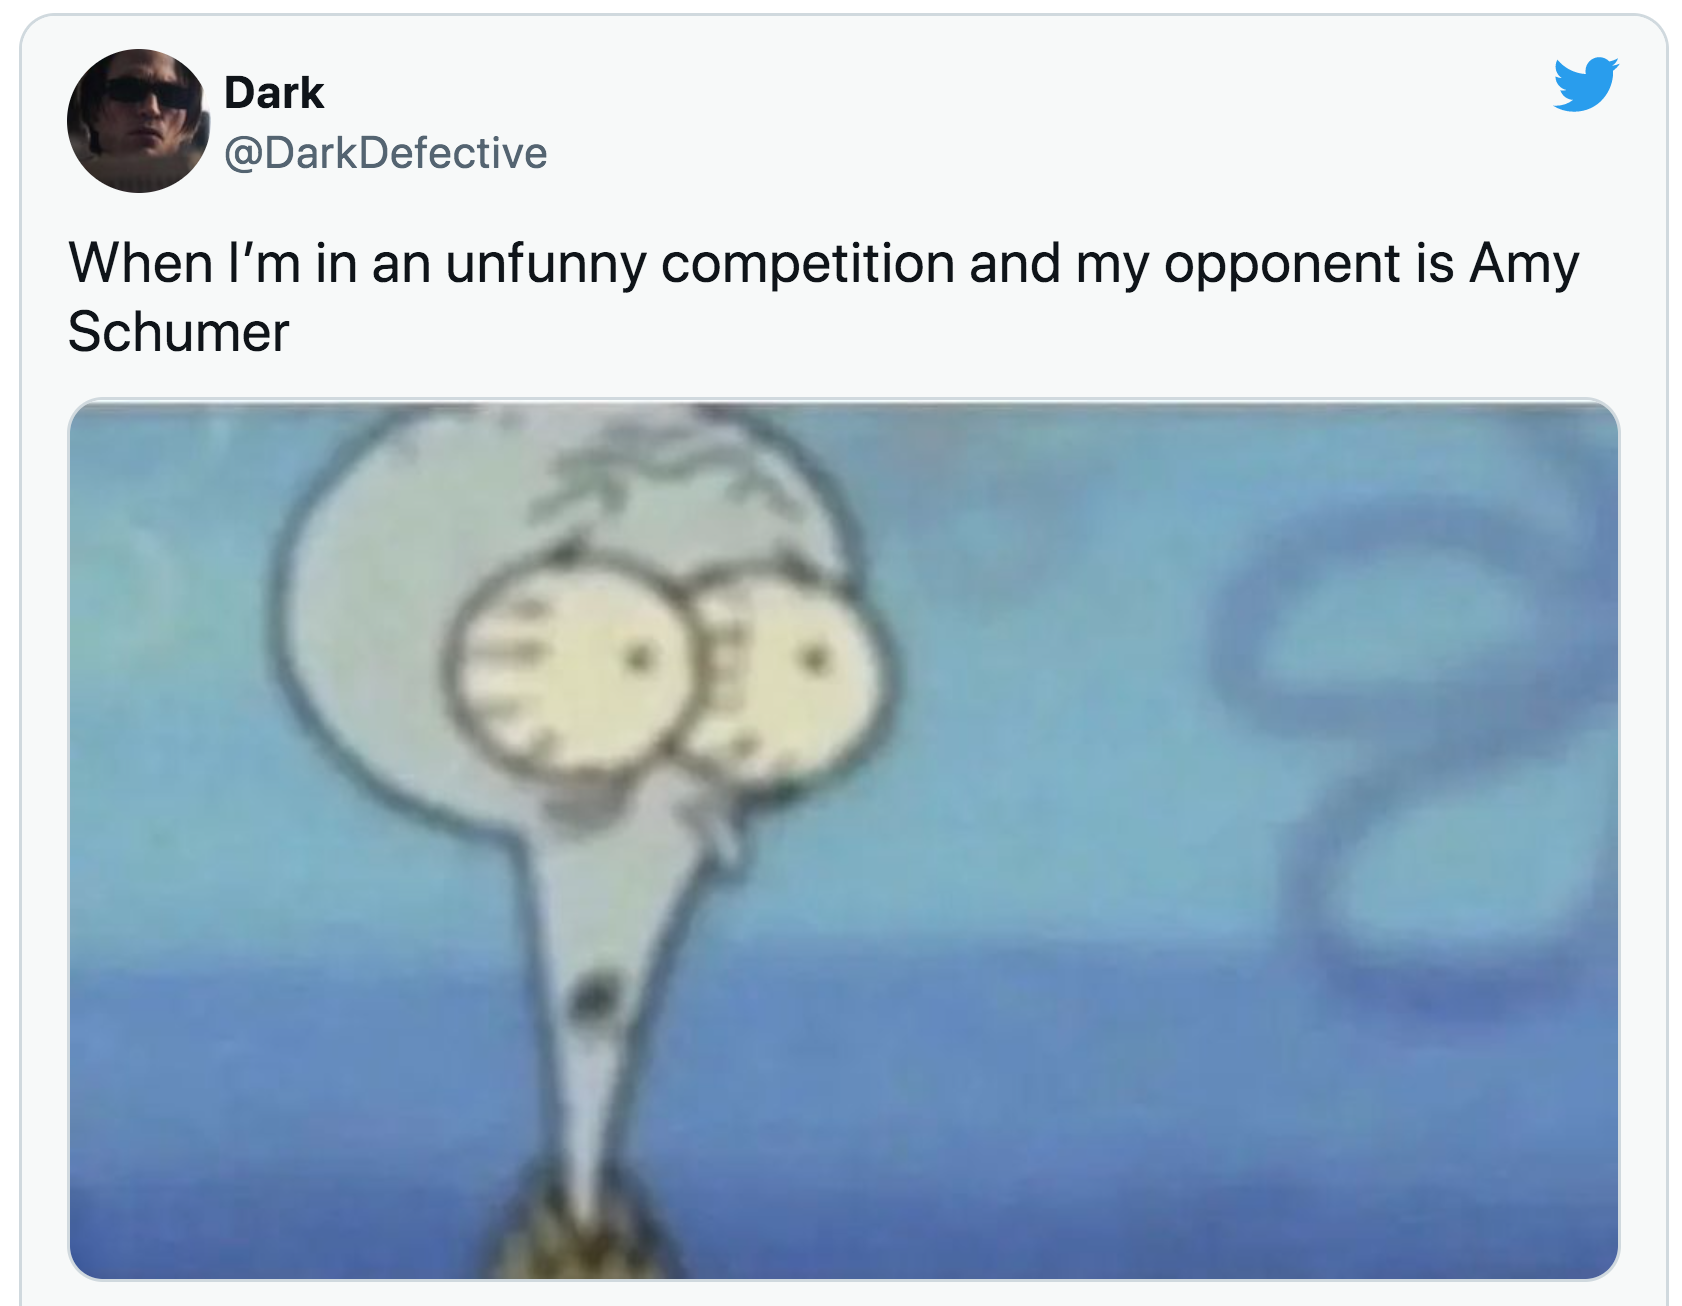 Amy Schumer Oscars Joke - squidward competition meme template - Dark When I'm in an unfunny competition and my opponent is Amy Schumer